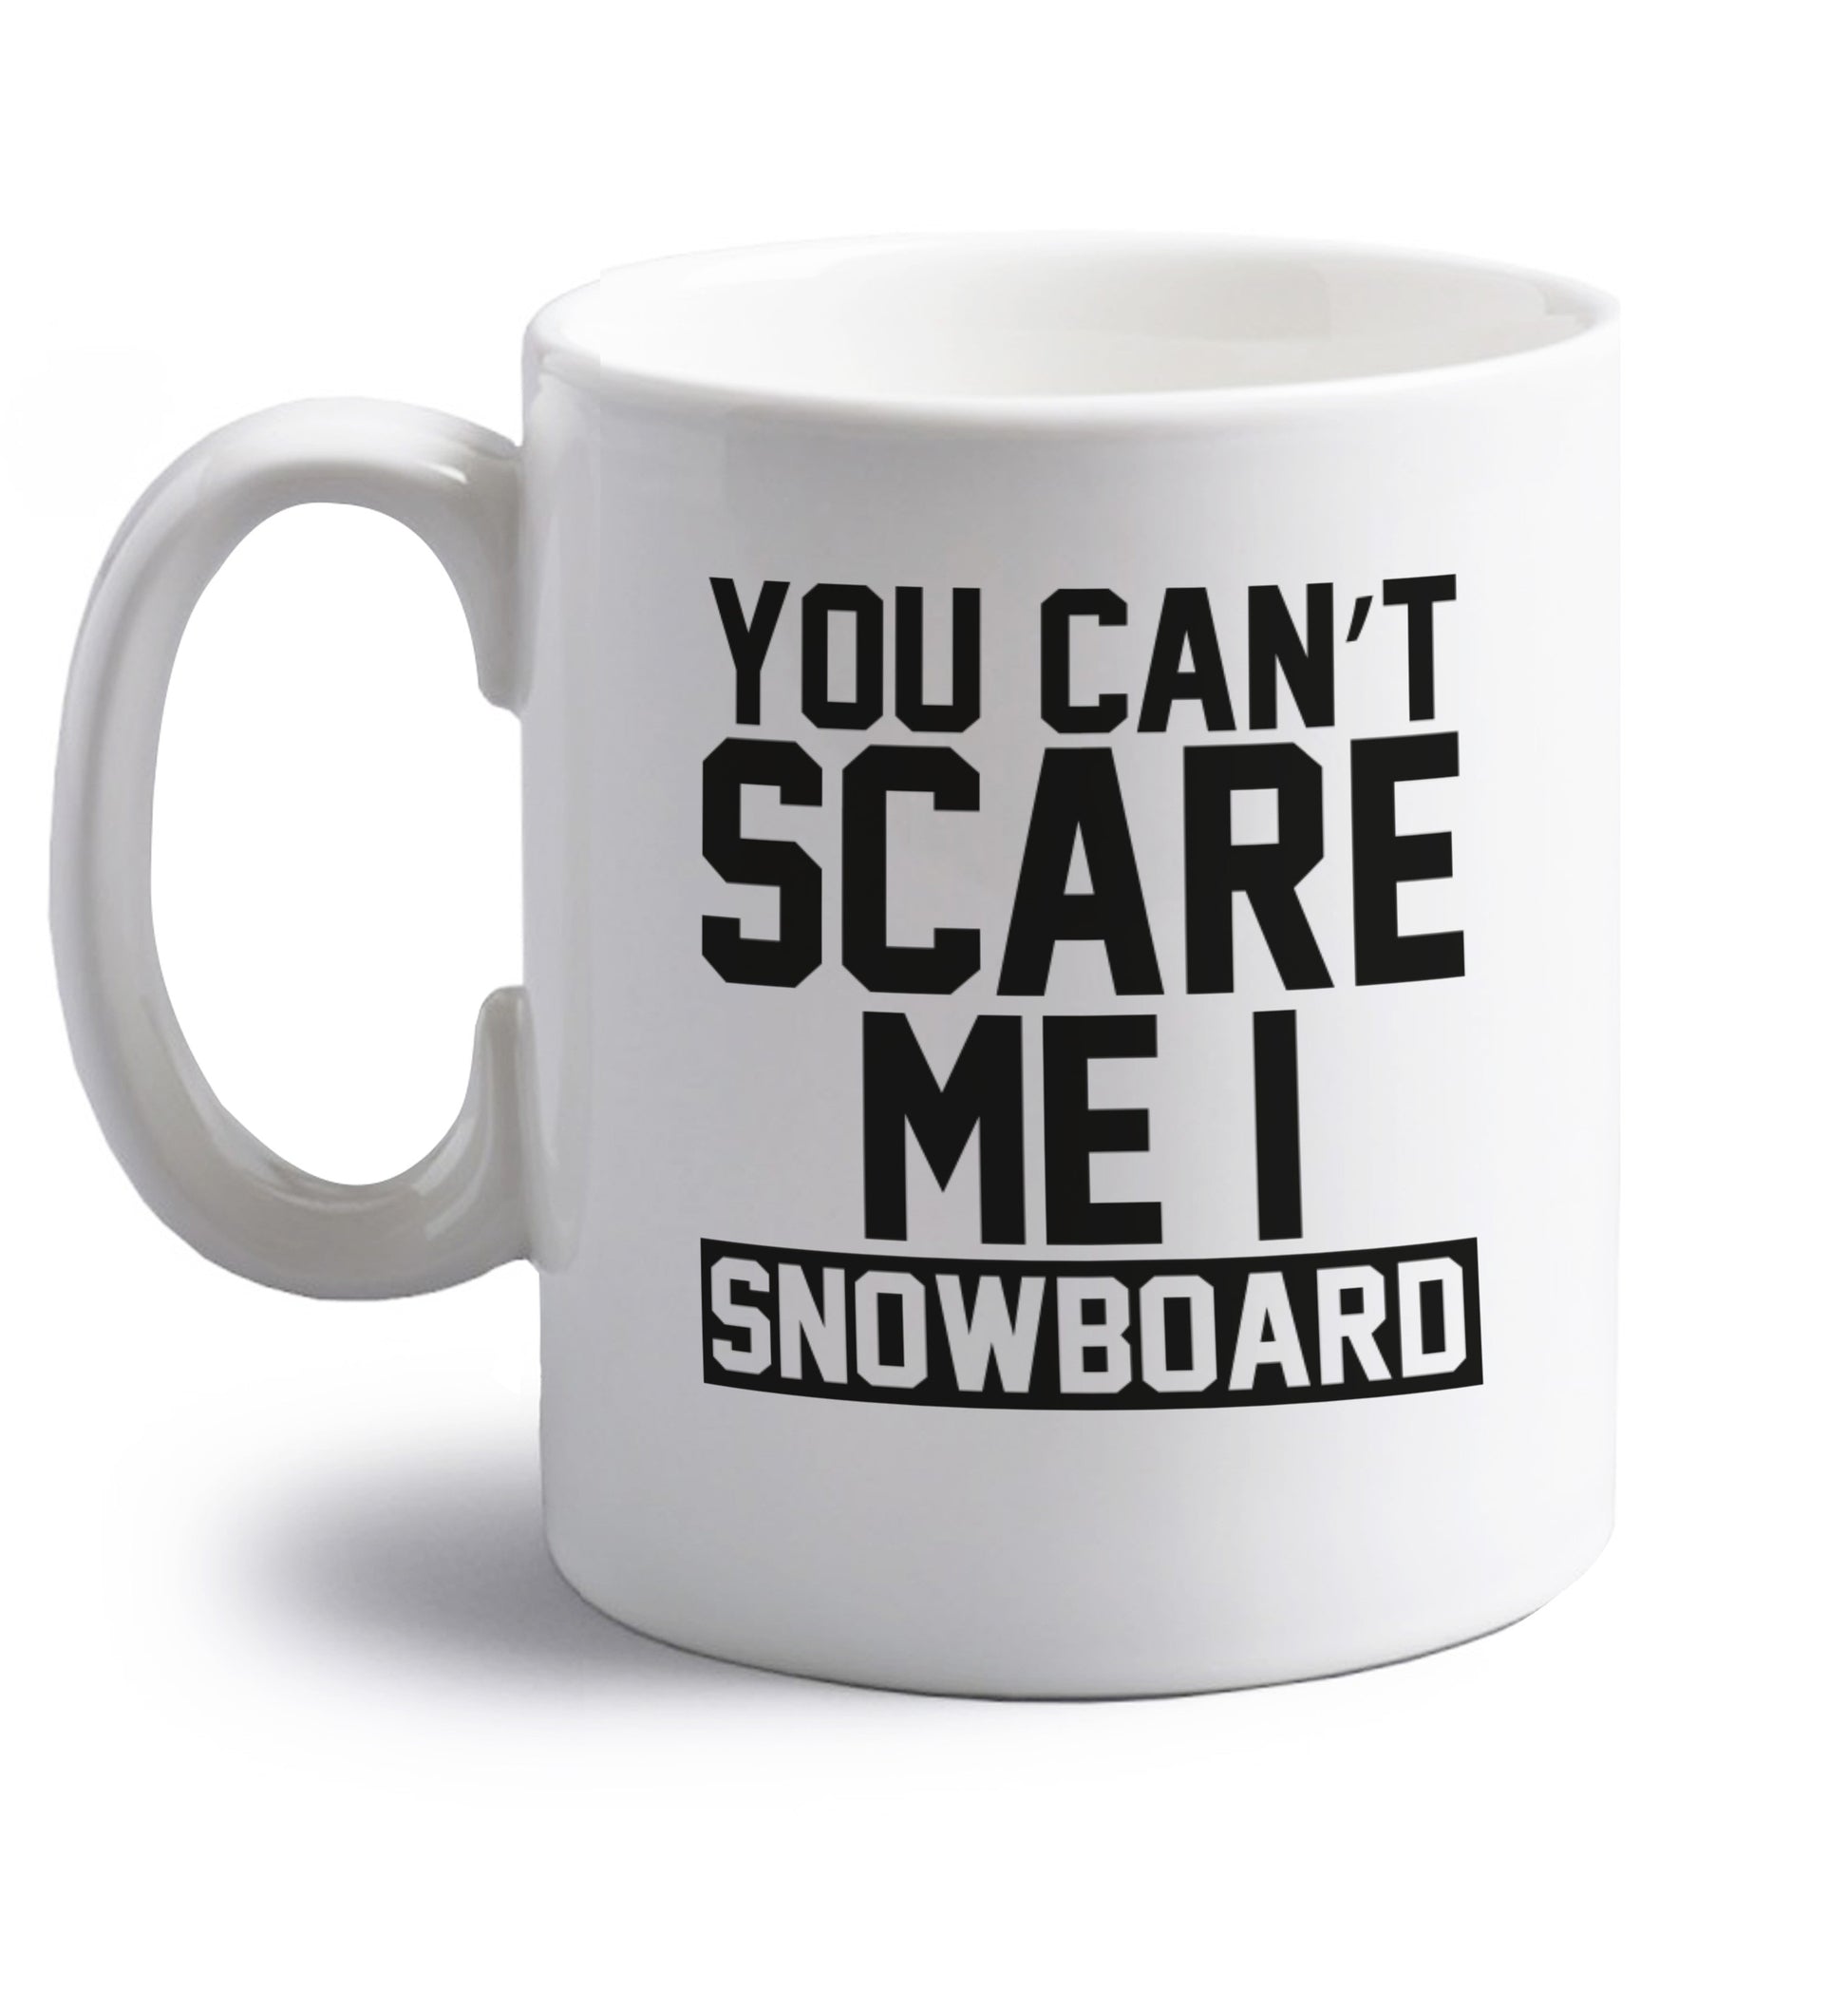 You can't scare me I snowboard right handed white ceramic mug 